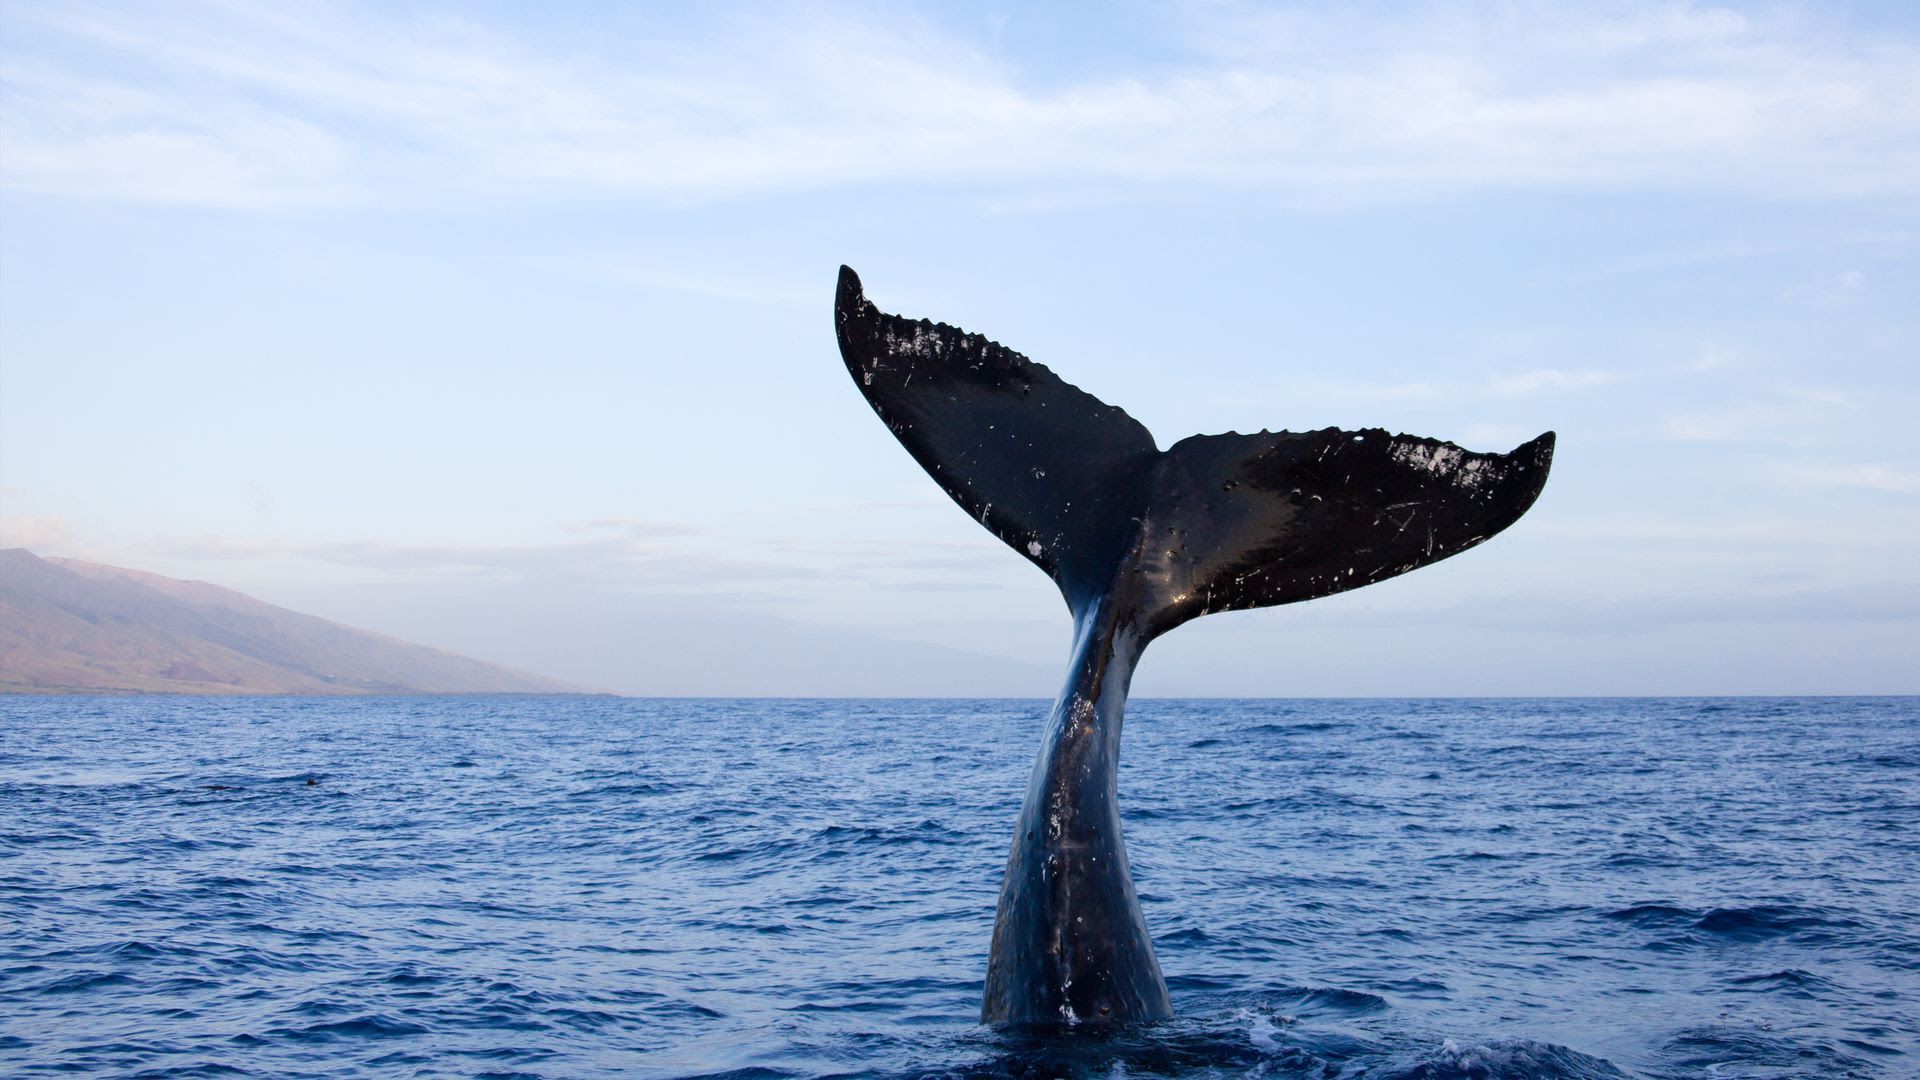 A whale tail in the ocean